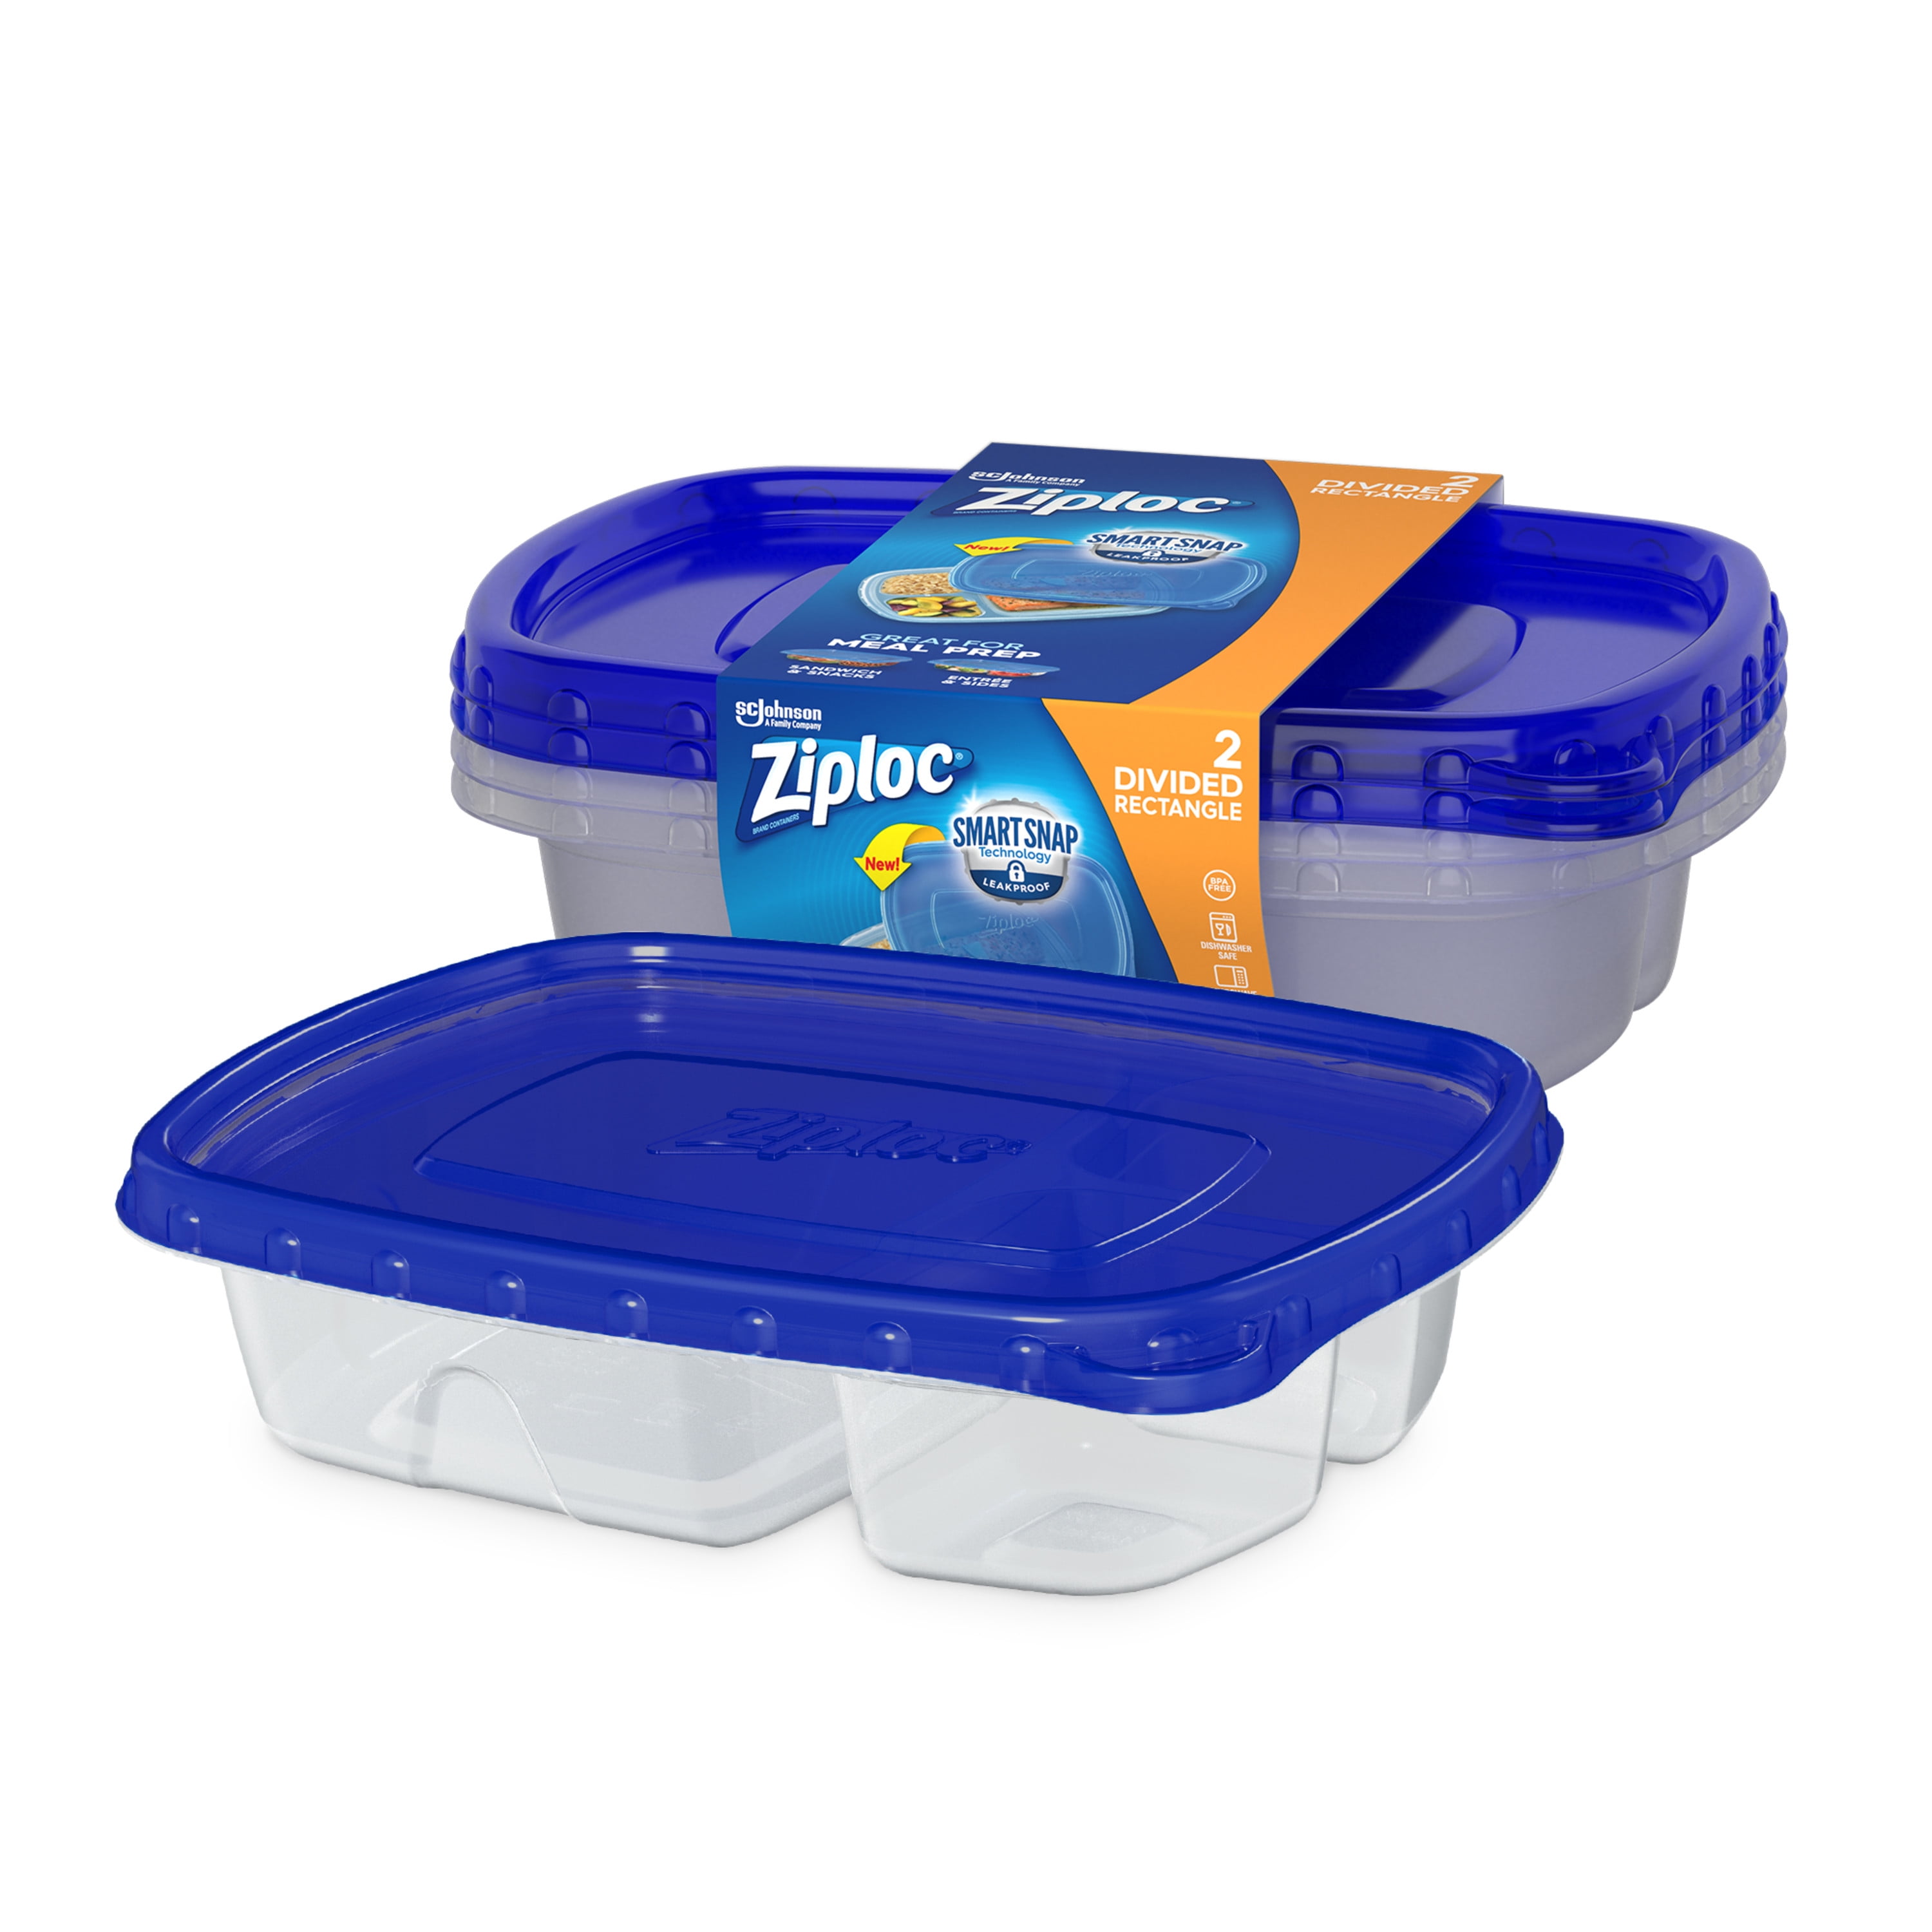 Ziploc Smart Snap Large Rectangle Containers and Lids - Shop Food